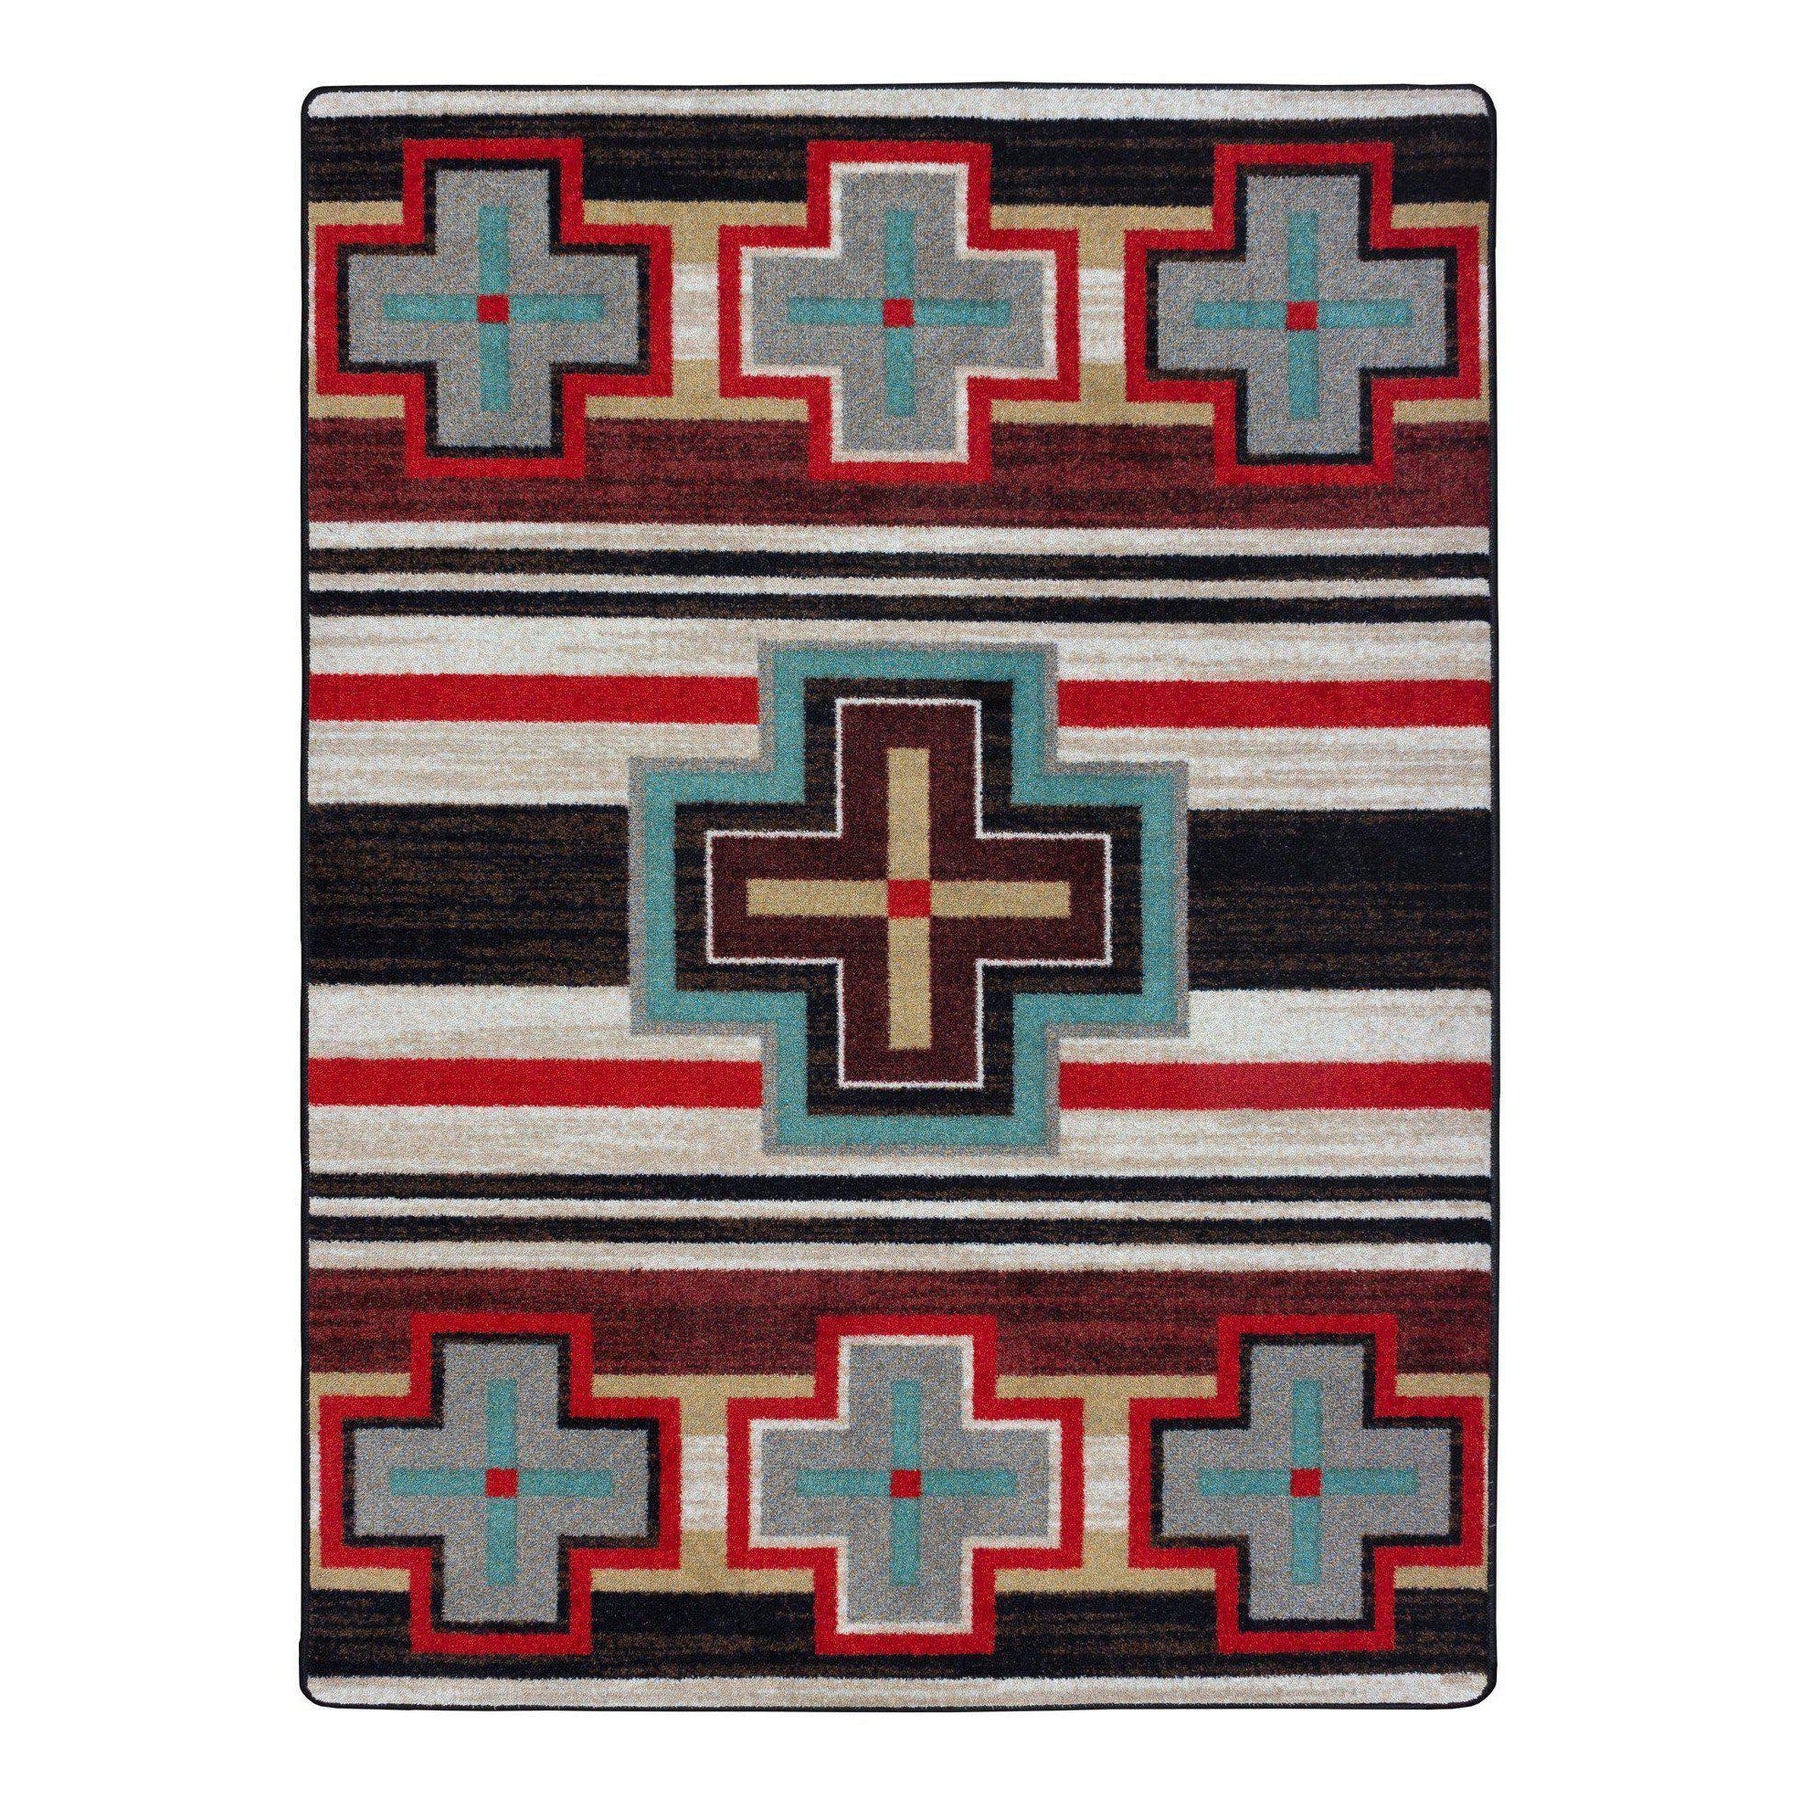 CabinRugs | Home of Cabin, Lodge, & Southwestern Inspired Rugs